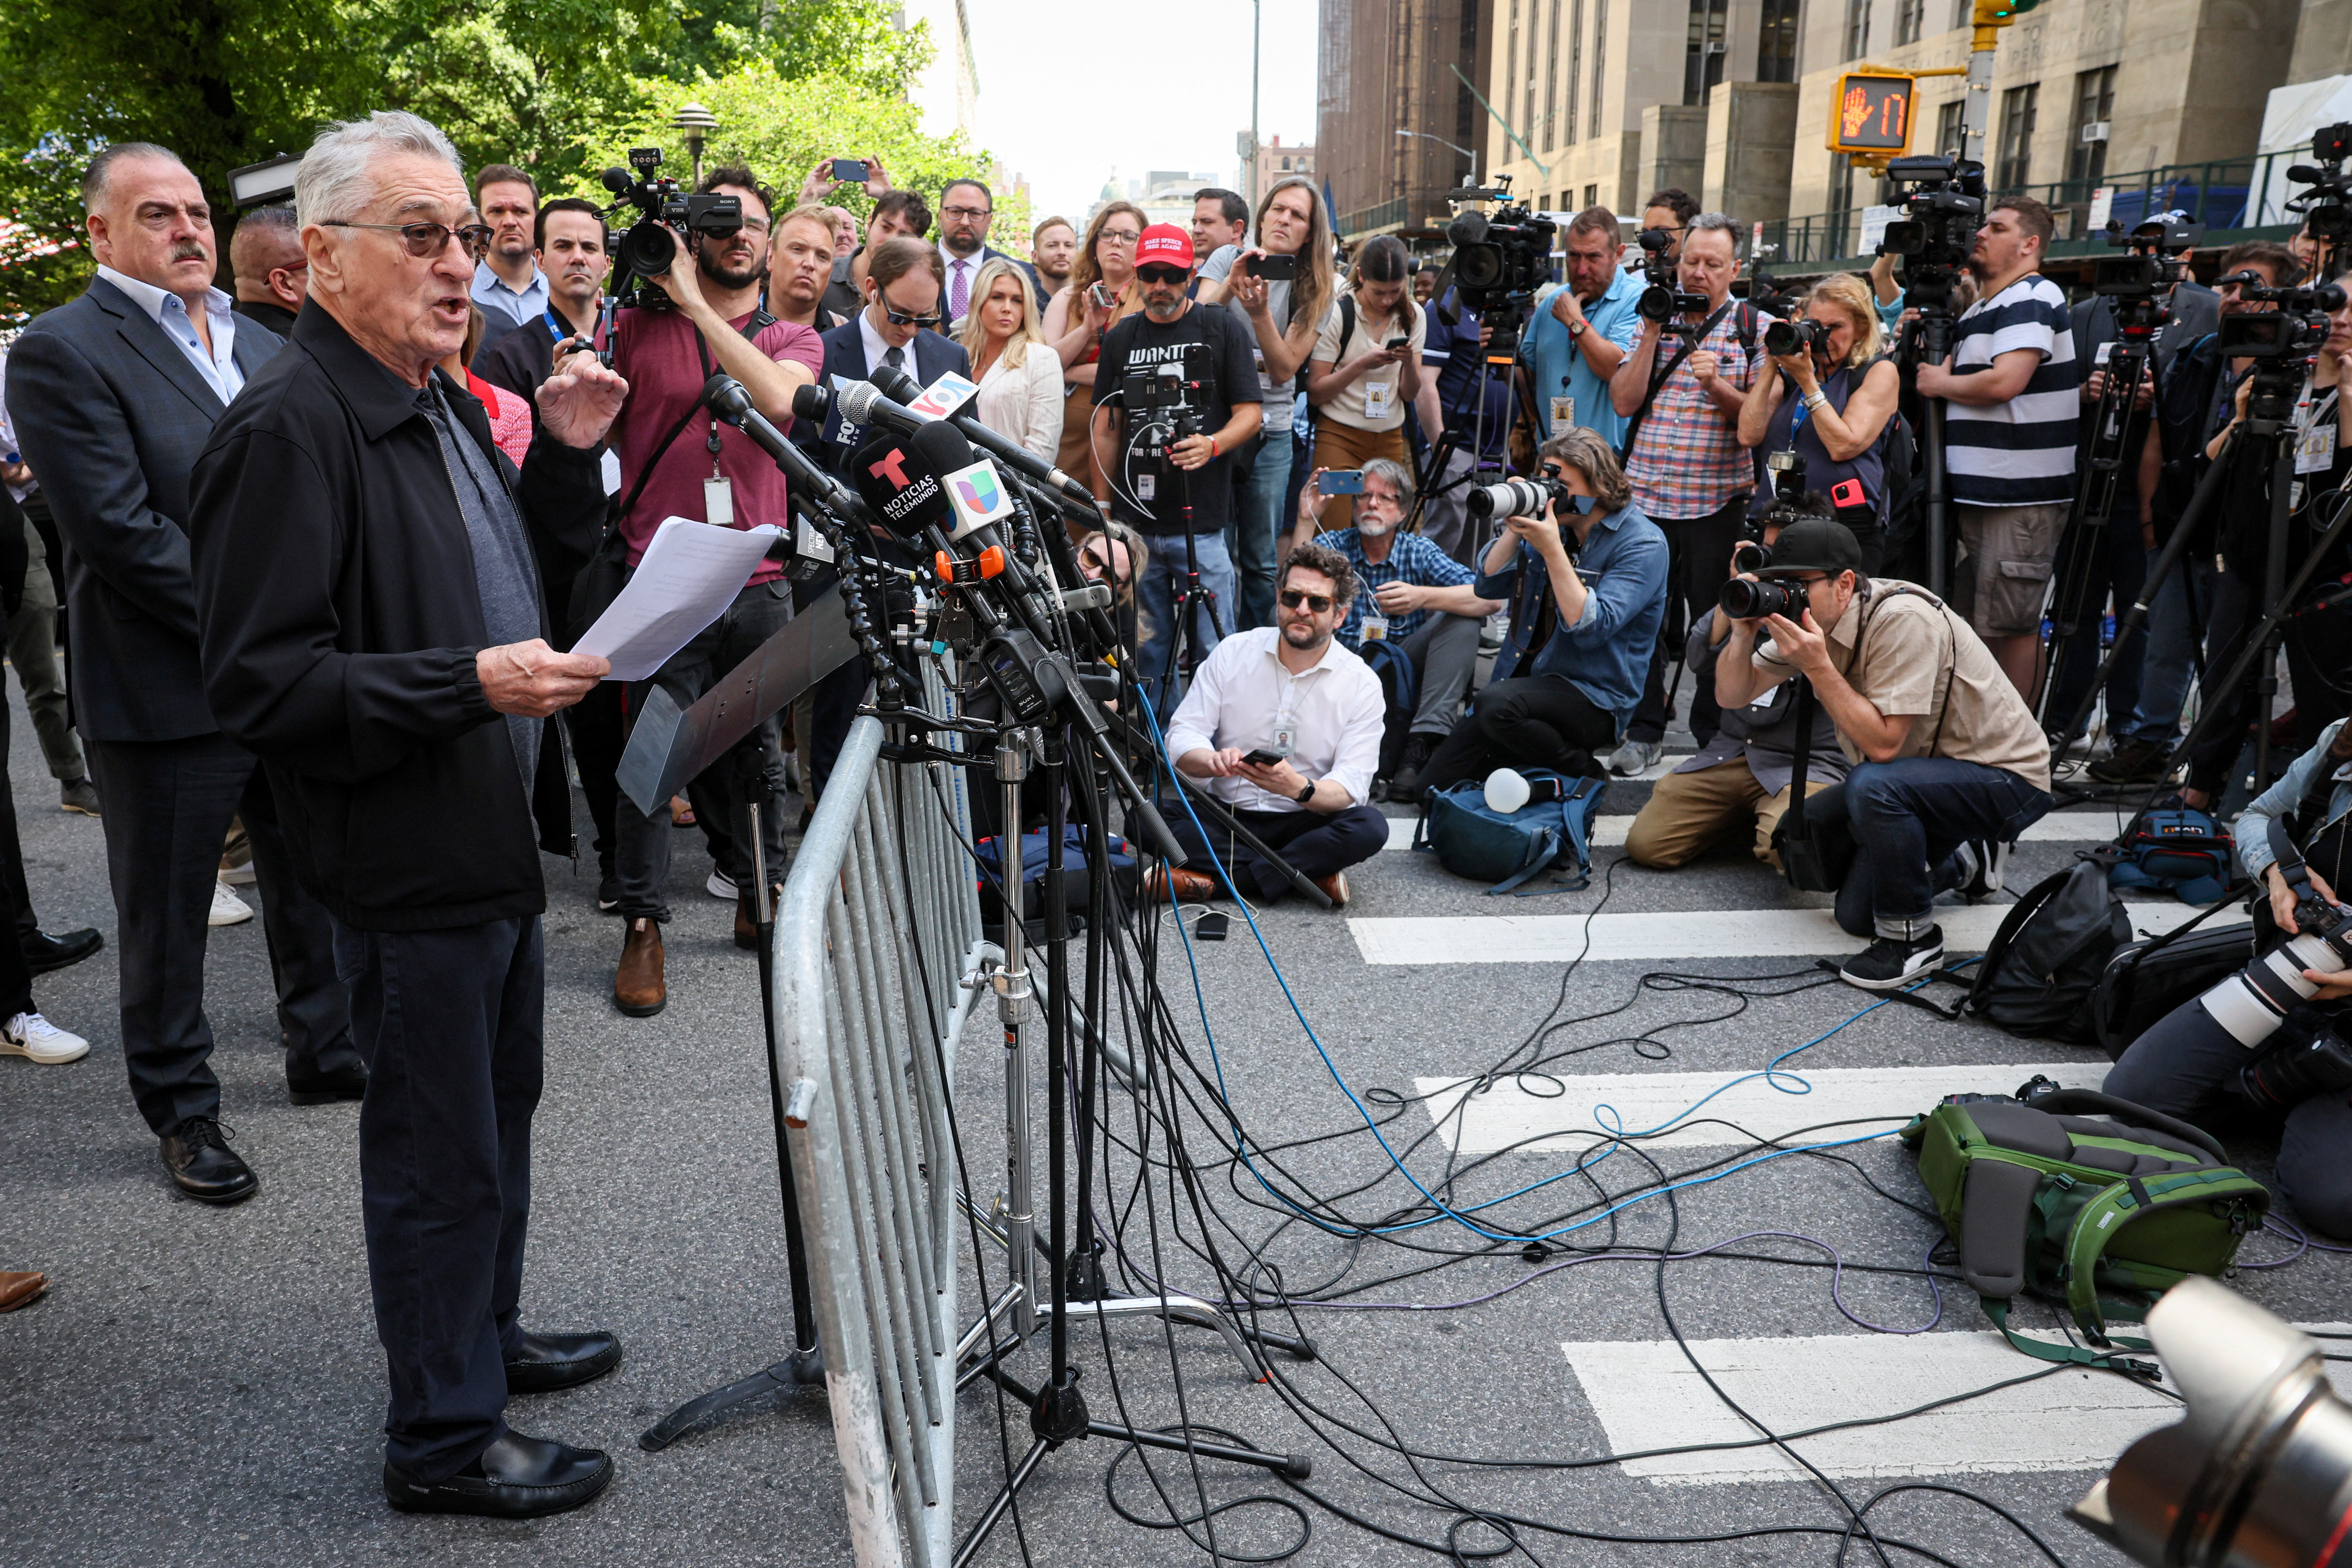 Actor Robert De Niro speaks during a news conference outside Trump trial in New York